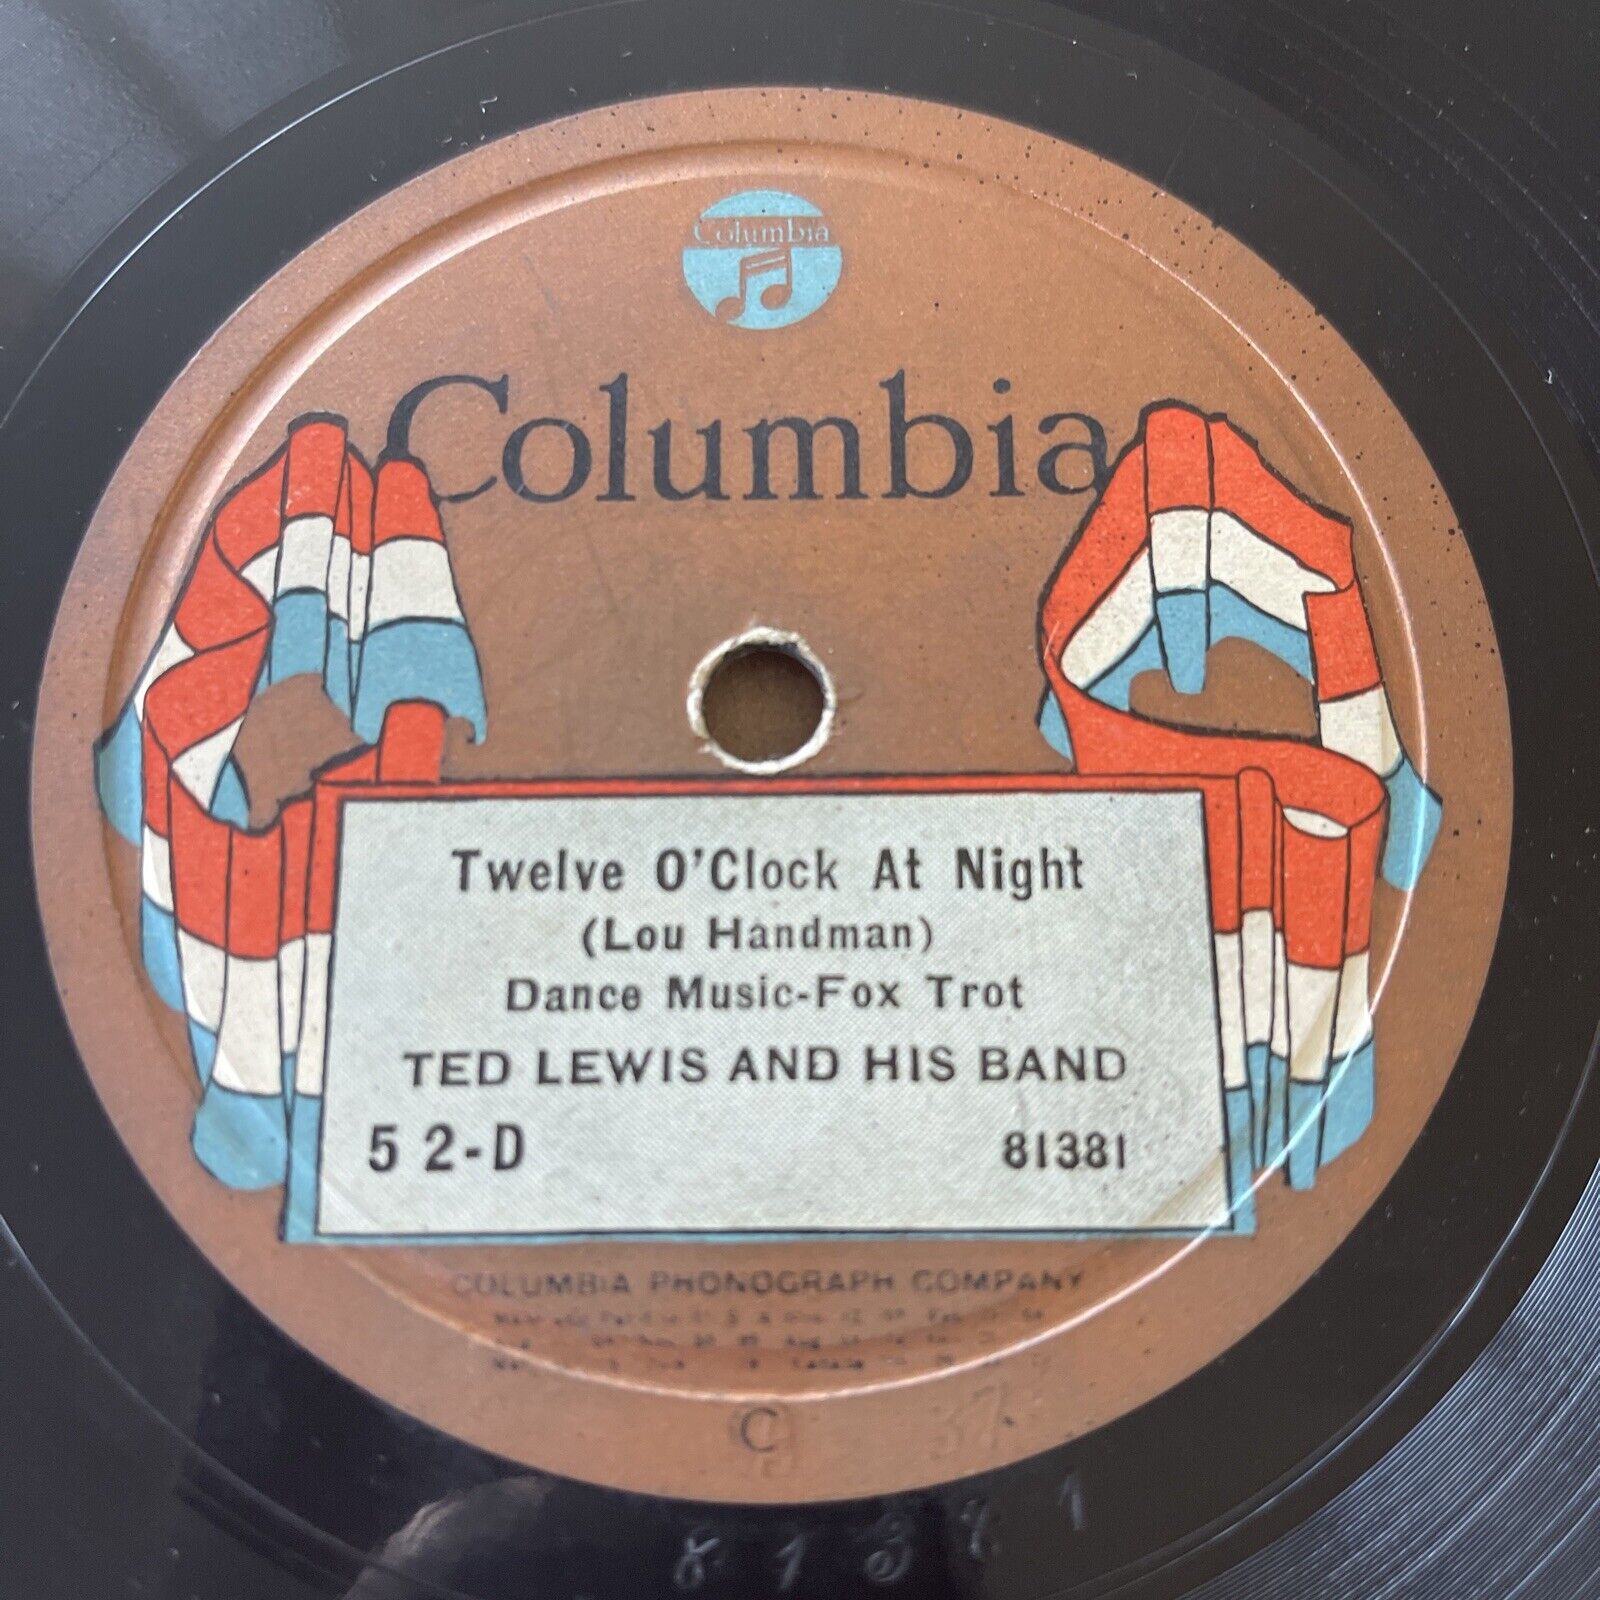 78 Jazz Ted Lewis & His Band Twelve O'Clock At Night & The One 52-D 1923 V+  | eBay